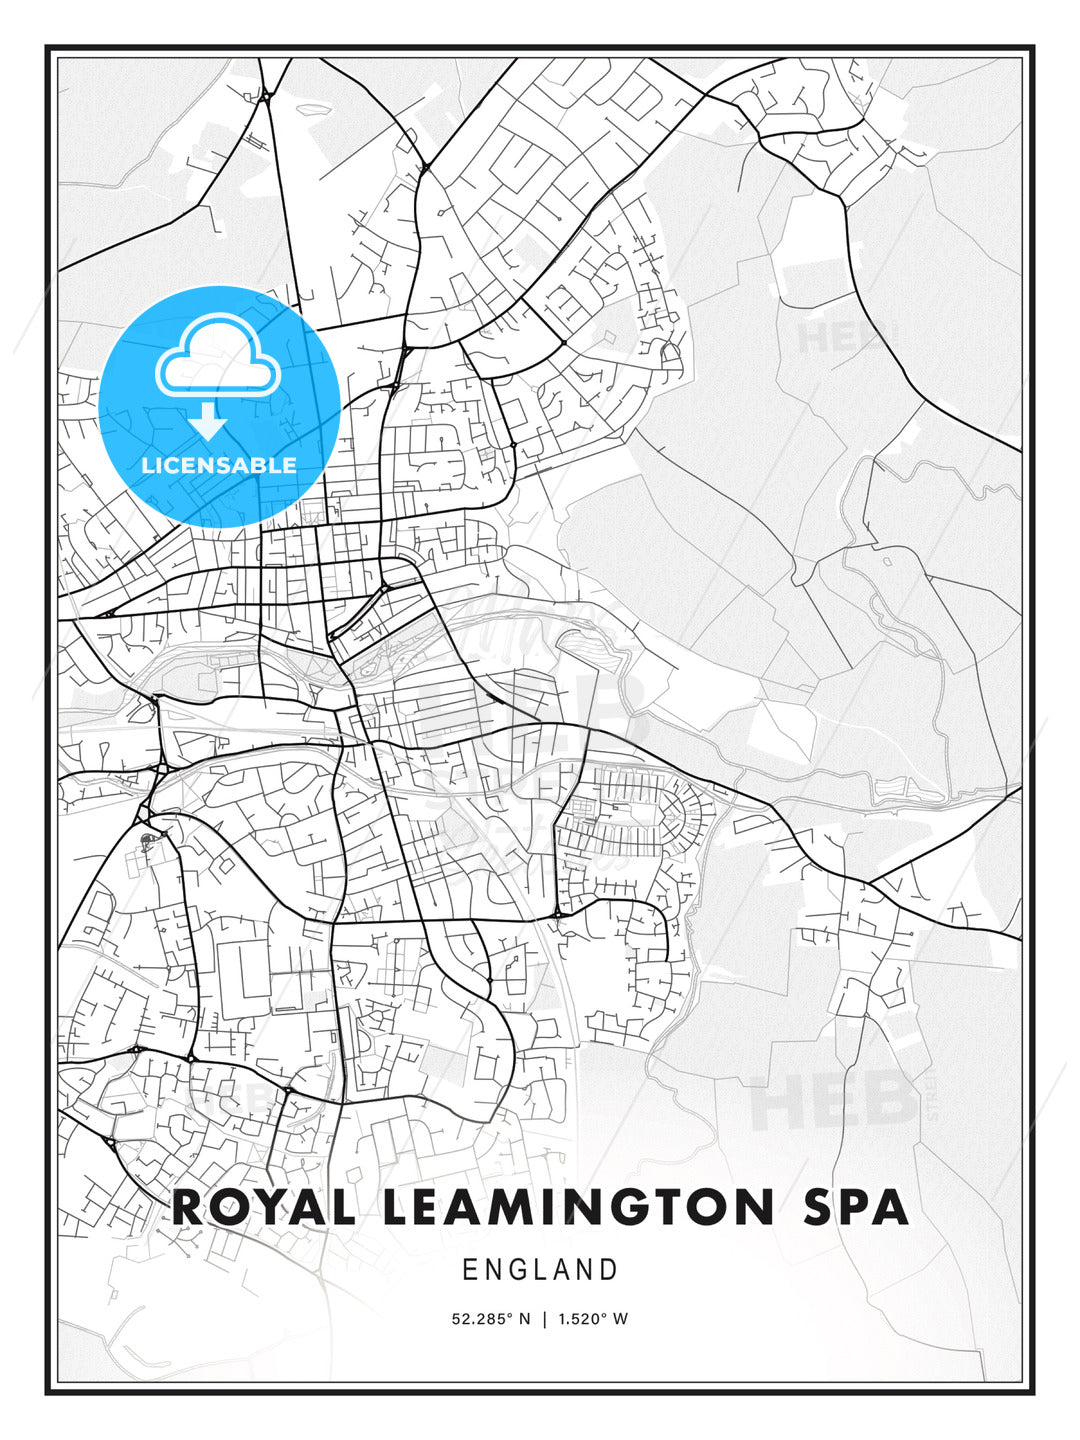 Royal Leamington Spa, England, Modern Print Template in Various Formats - HEBSTREITS Sketches